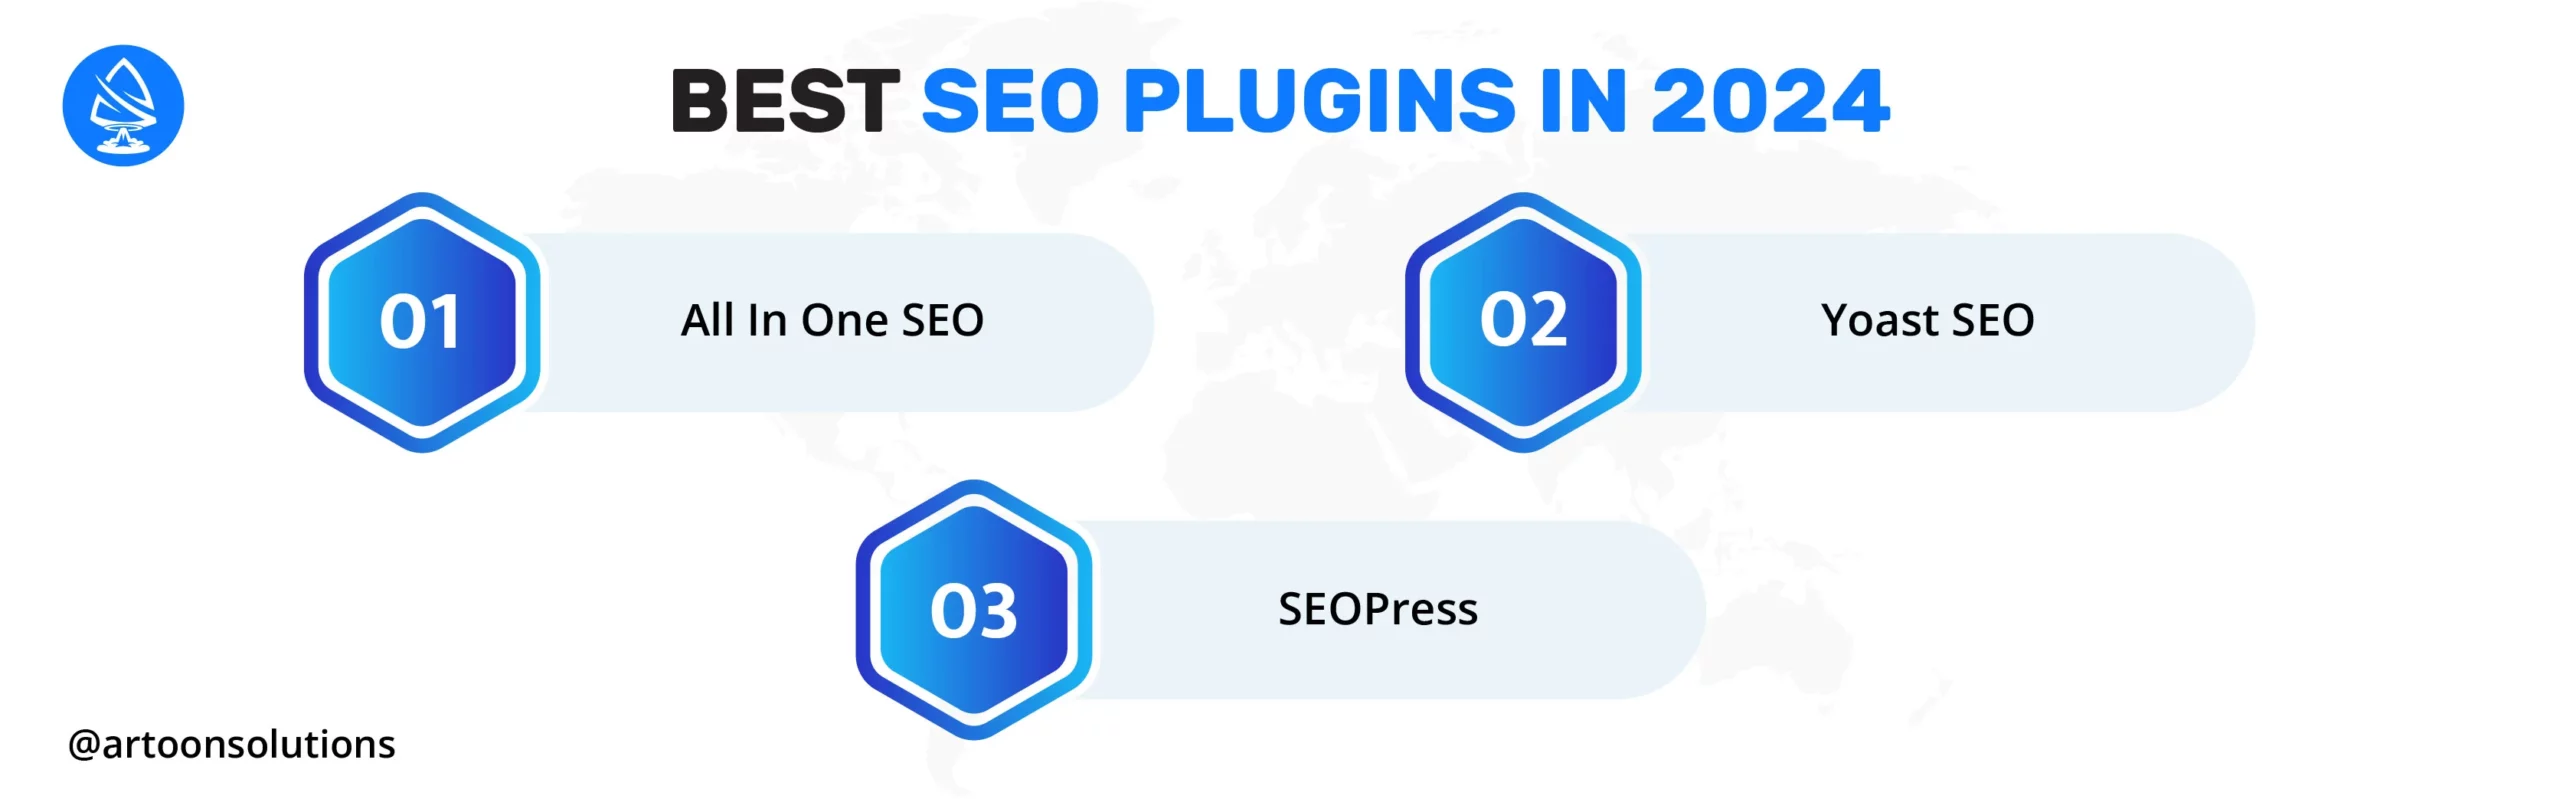 Overview of the Best WordPress SEO Plugins in 2024